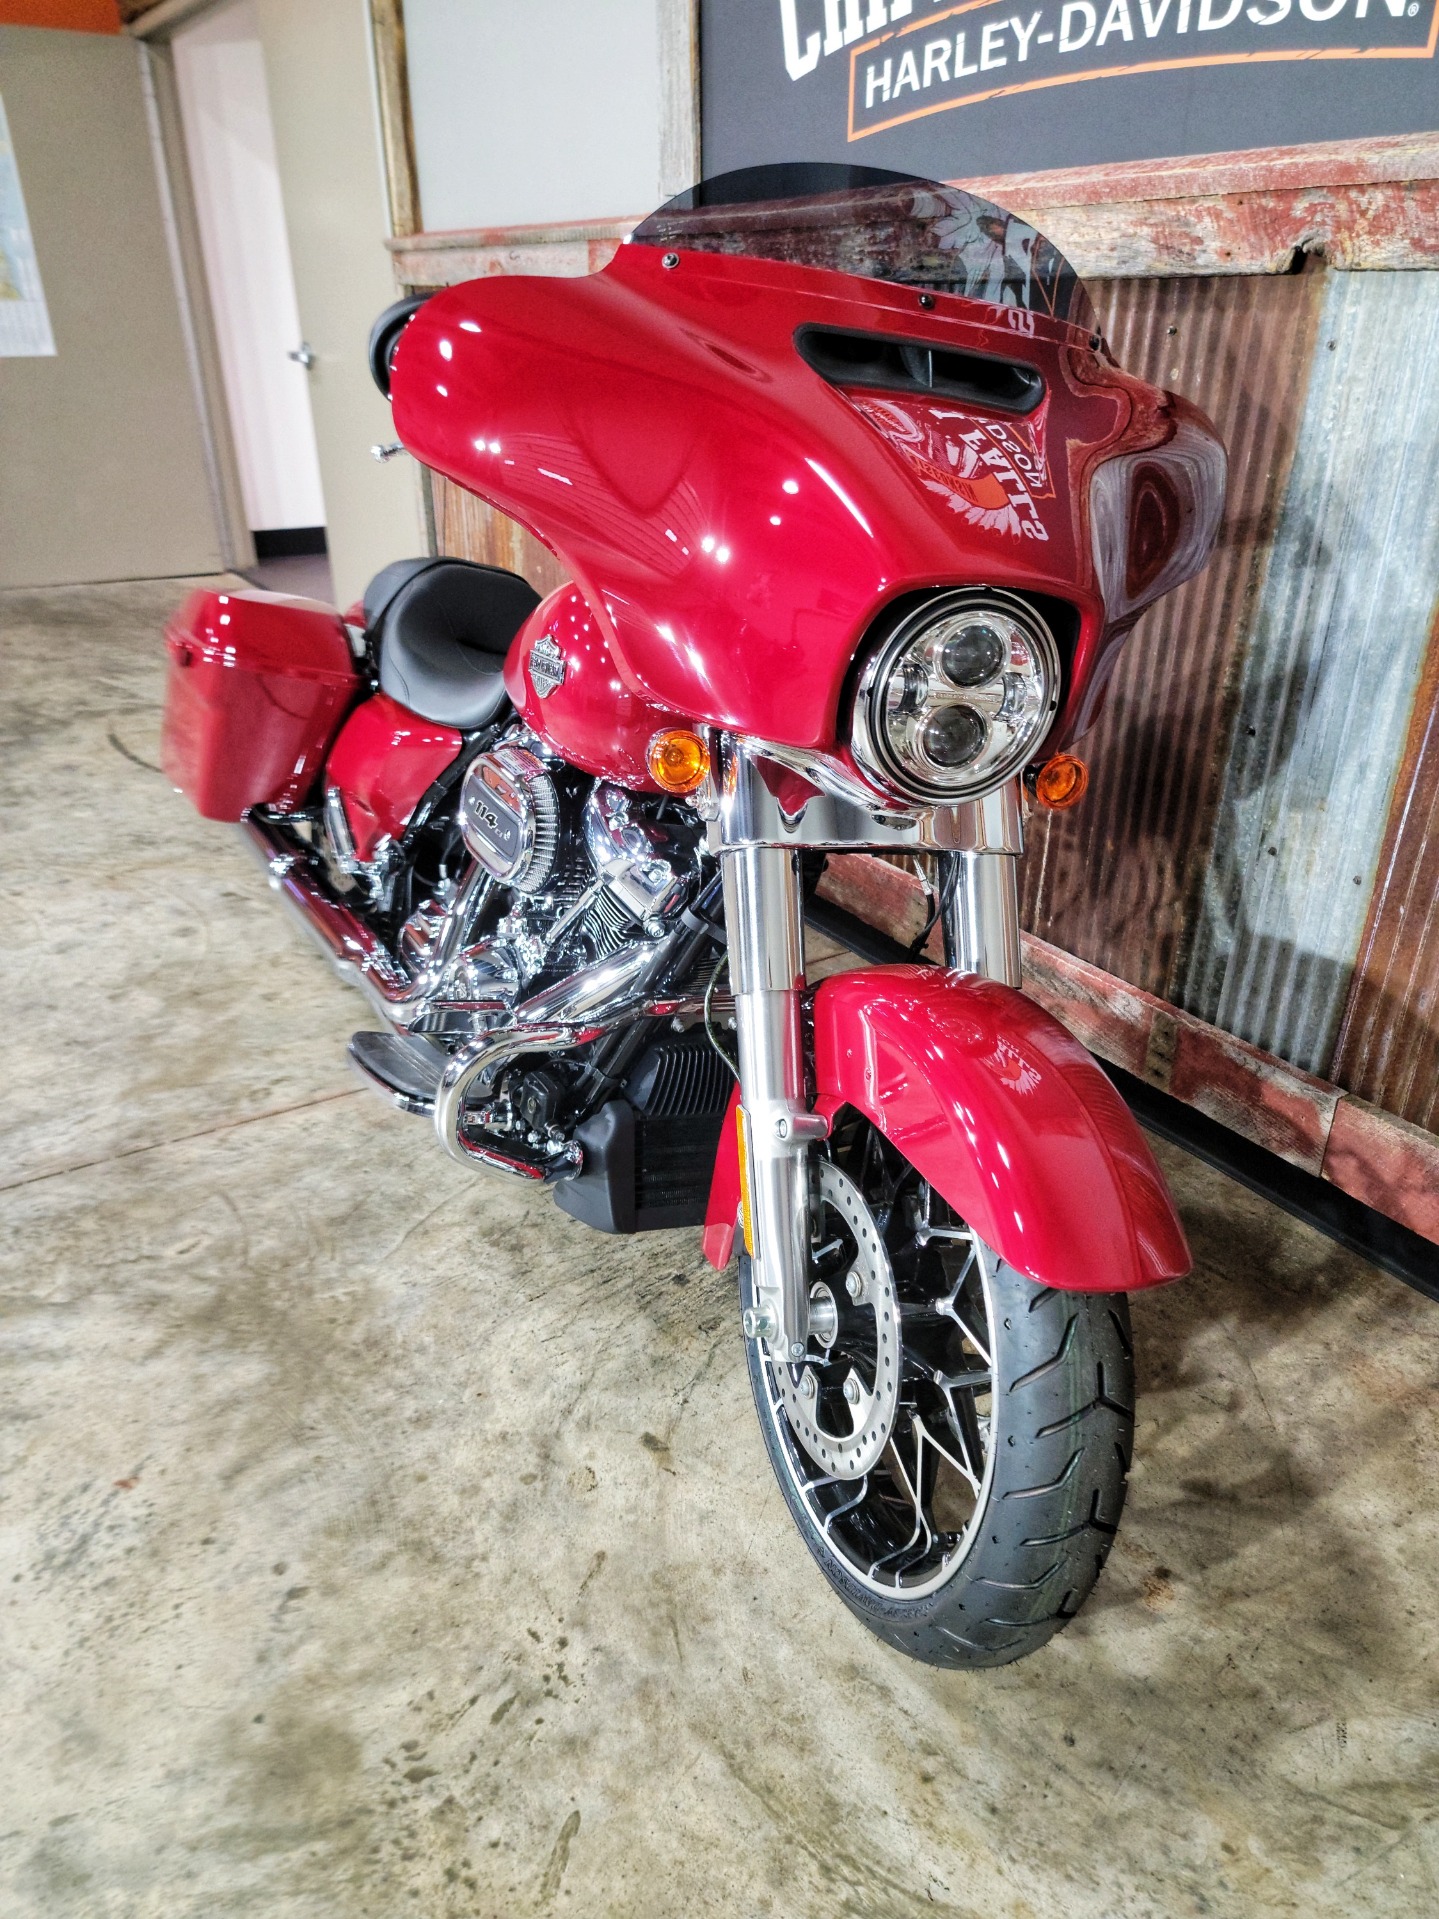 2021 Harley-Davidson Street Glide® Special in Chippewa Falls, Wisconsin - Photo 10